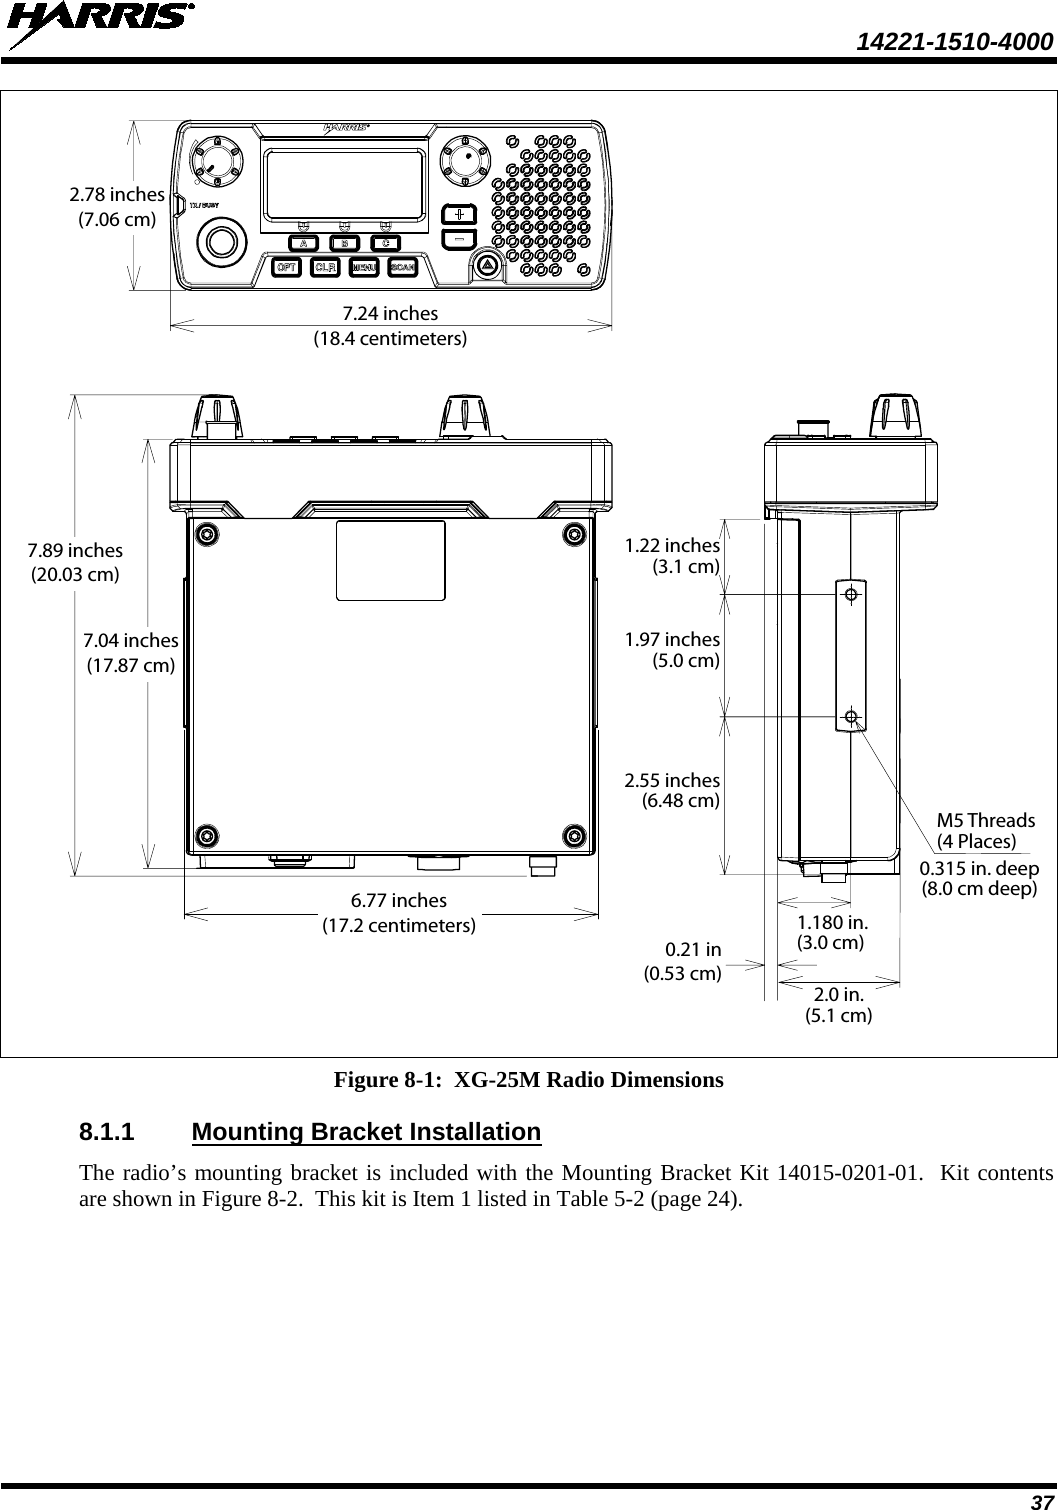  14221-1510-4000 37    Figure 8-1:  XG-25M Radio Dimensions 8.1.1 Mounting Bracket Installation The radio’s mounting bracket is included with the Mounting Bracket Kit 14015-0201-01.  Kit contents are shown in Figure 8-2.  This kit is Item 1 listed in Table 5-2 (page 24). 7.24 inches(18.4 centimeters)2.78 inches(7.06 cm)7.04 inches(17.87 cm)7.89 inches(20.03 cm)2.0 in.(5.1 cm)0.315 in. deep(8.0 cm deep)M5 Threads(4 Places)1.180 in.(3.0 cm)0.21 in(0.53 cm)6.77 inches(17.2 centimeters)1.97 inches(5.0 cm)1.22 inches(3.1 cm)2.55 inches(6.48 cm)